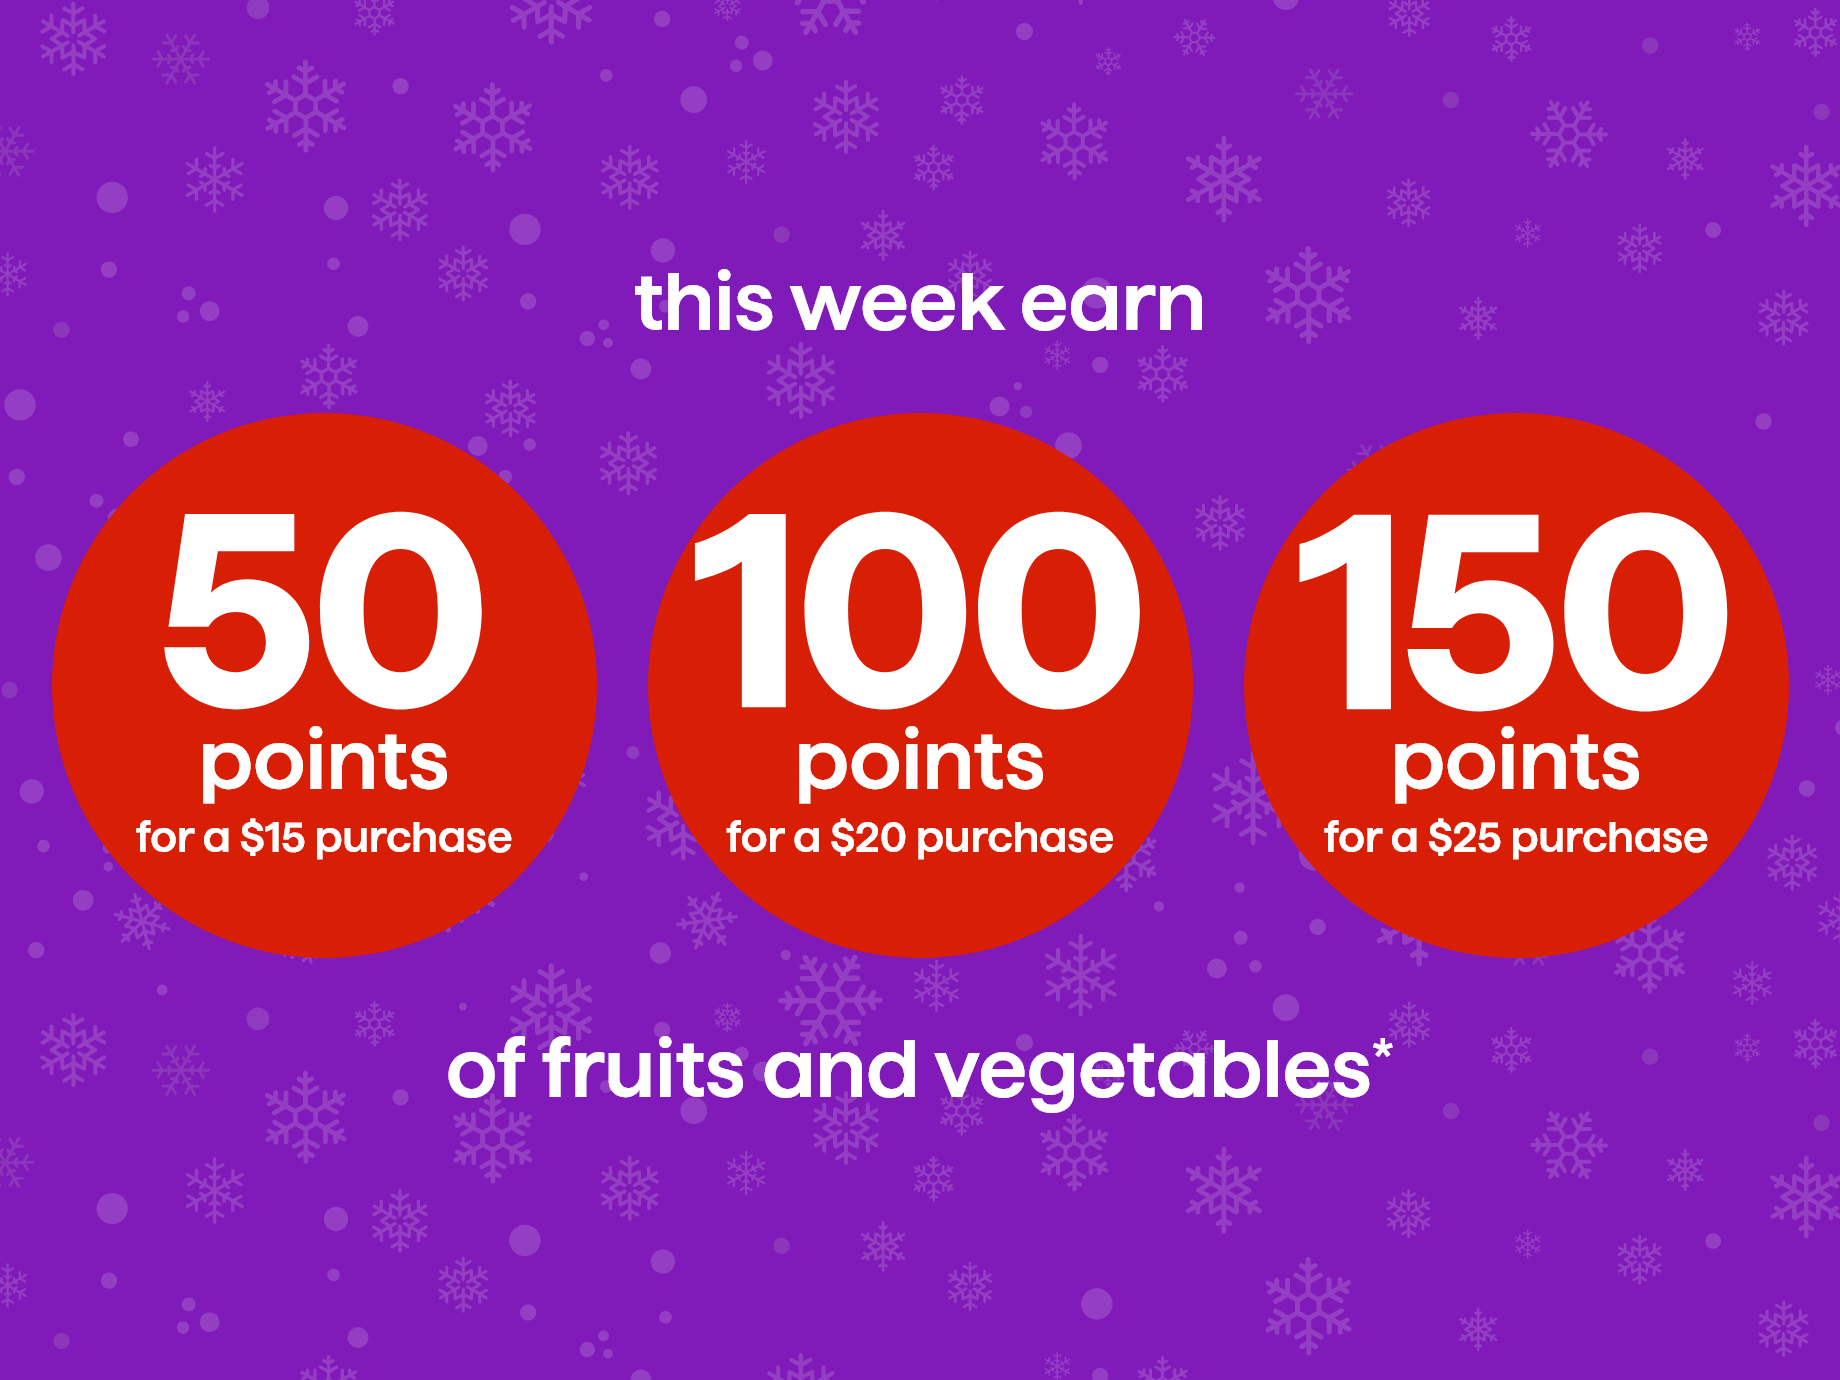 This week earn 50 points for a $15 purchase, 100 points for $20 purchase or 150 points for $25 purchase of fruits and vegetables*.